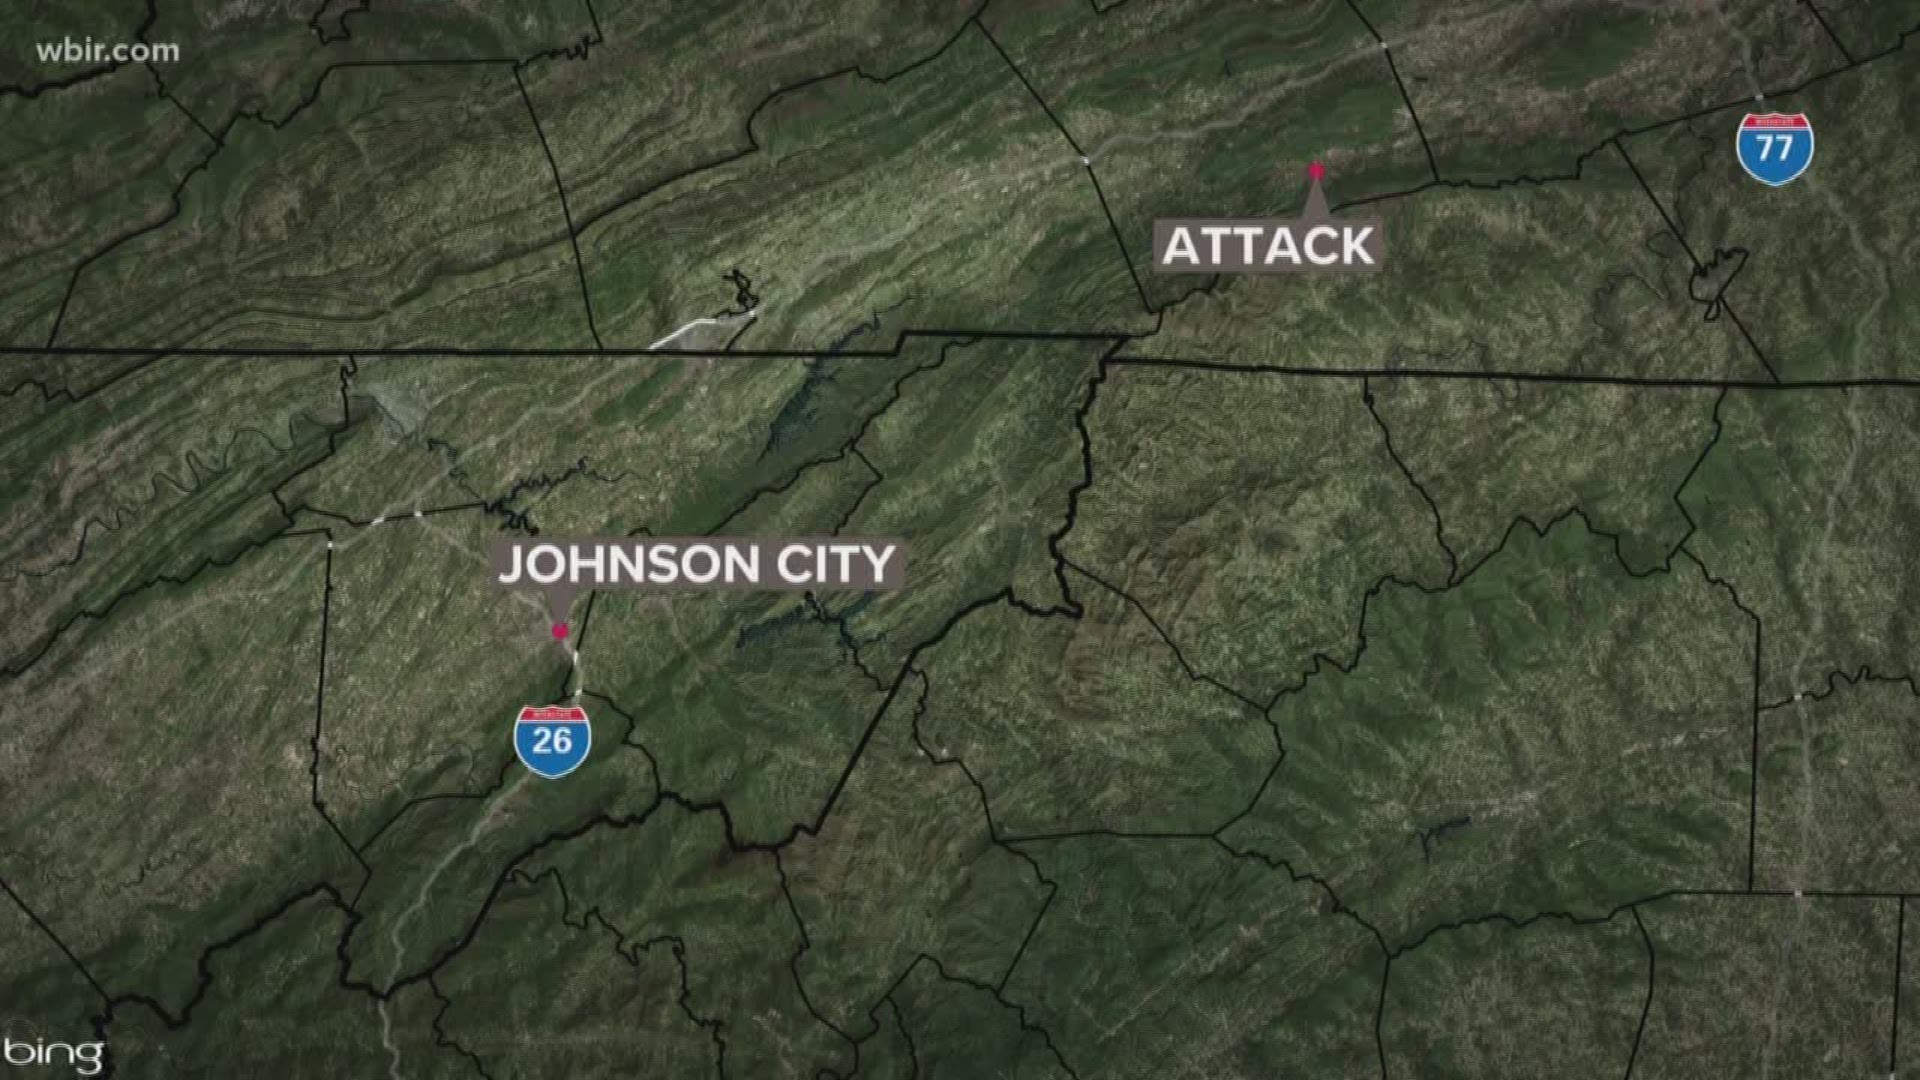 Authorities say it is connected to the hiker known as 'Sovereign'.